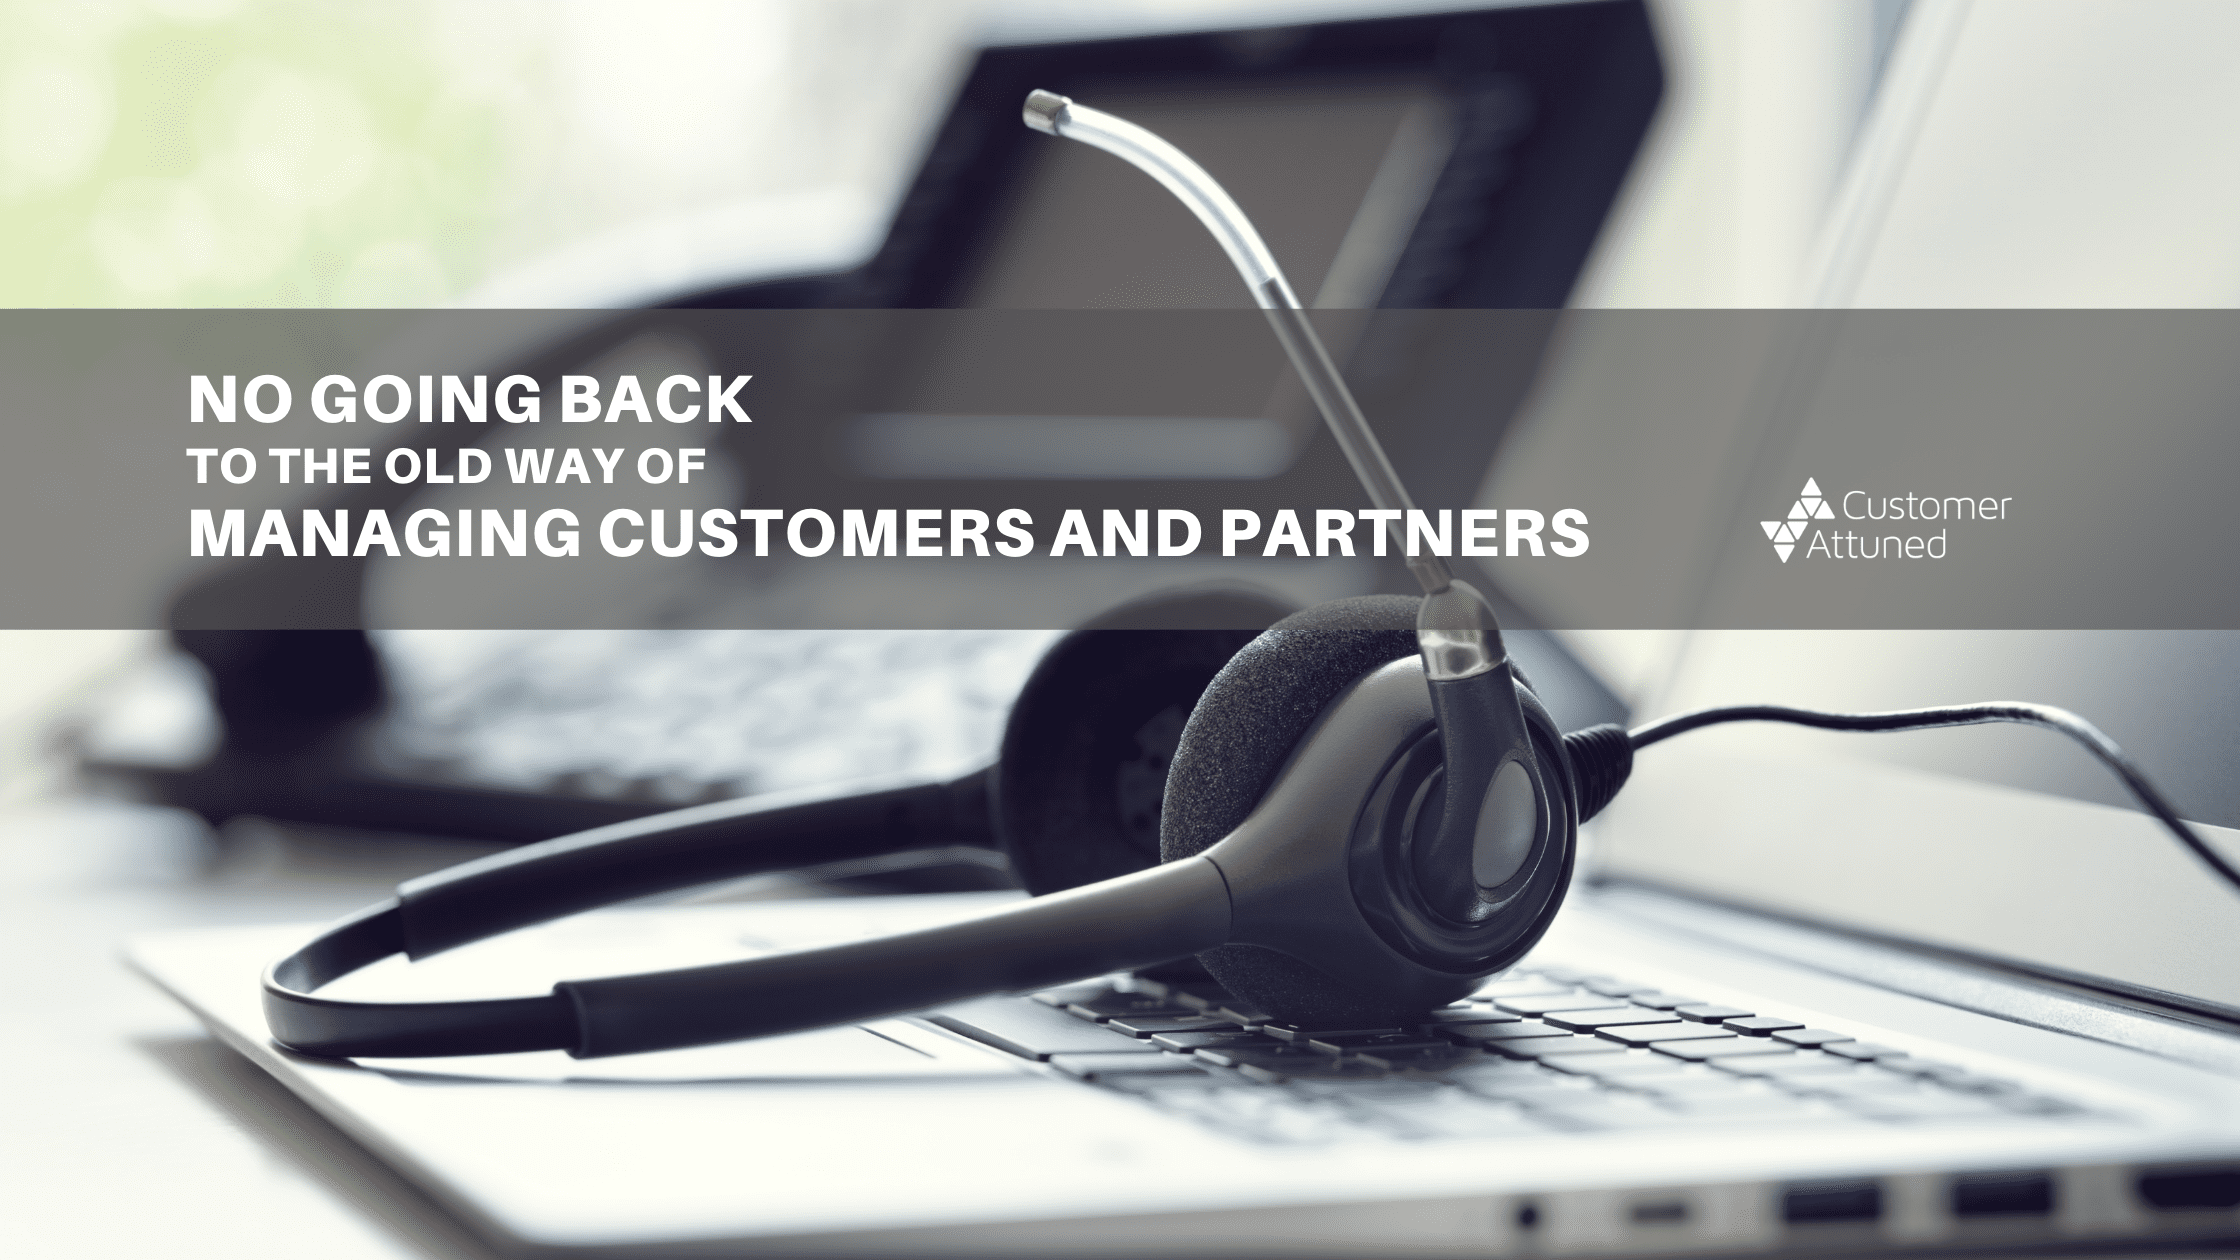 No going back to the old way of managing customers and partners